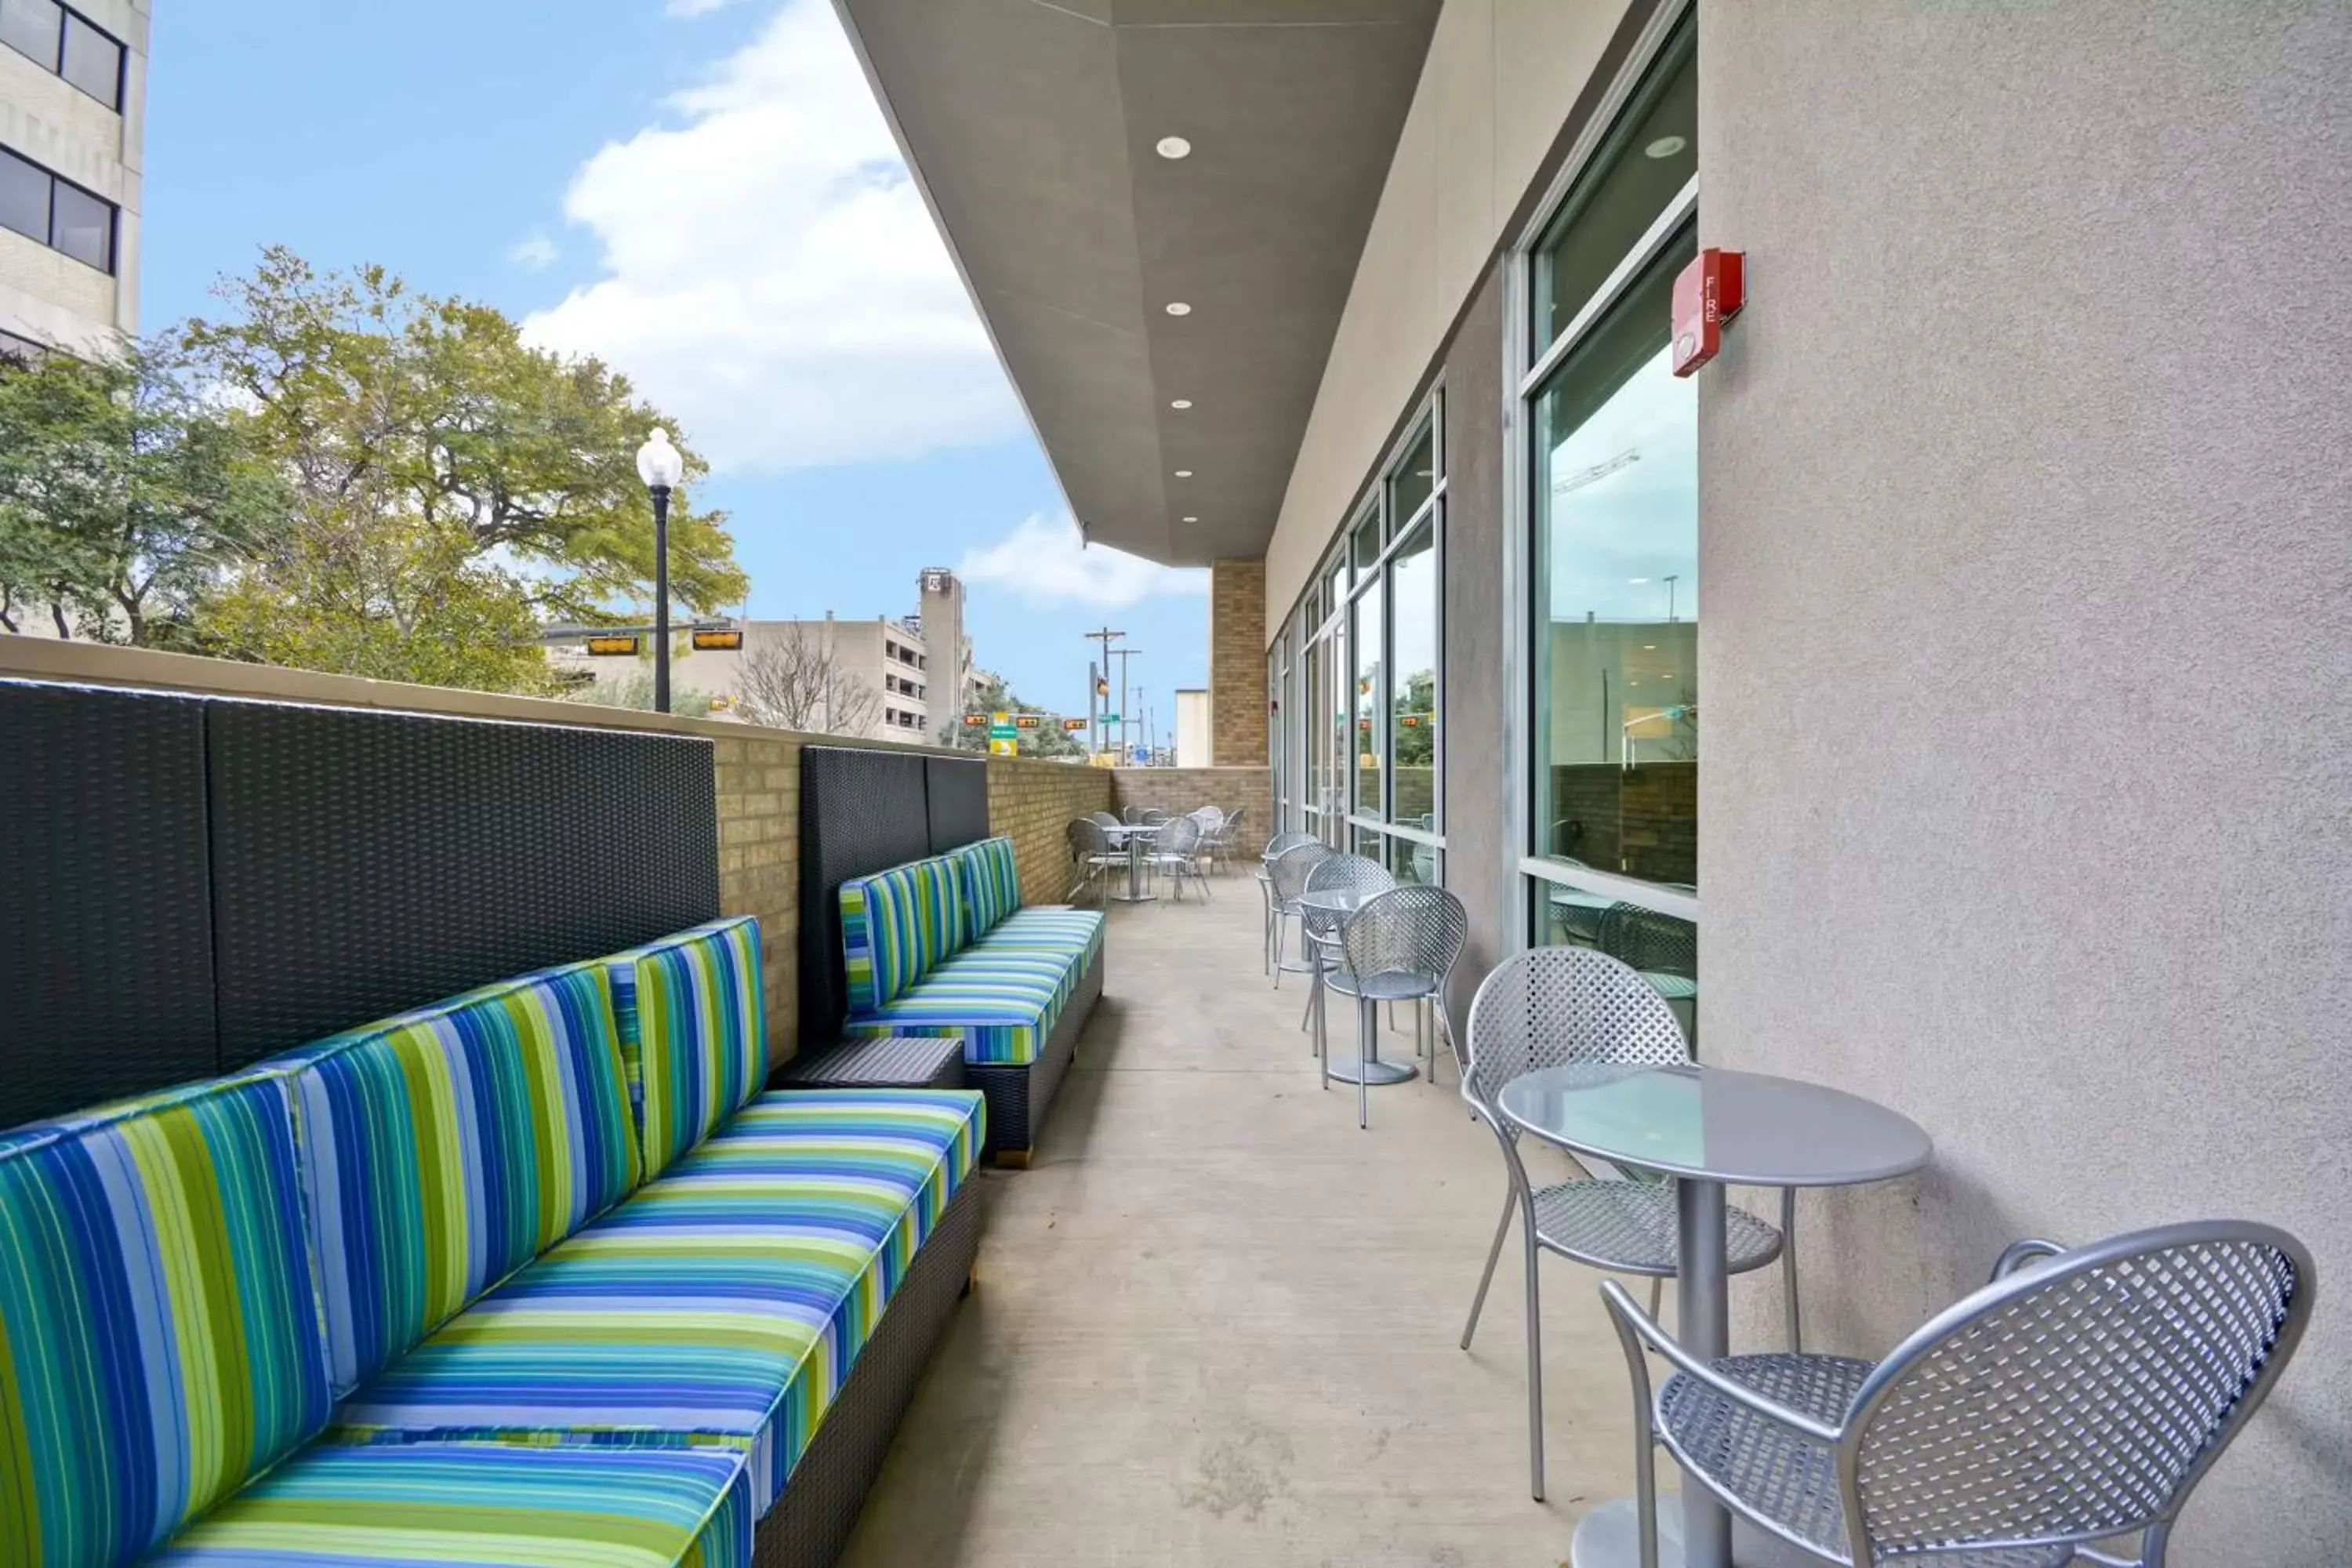 Property building, Balcony/Terrace in Home2 Suites by Hilton Dallas Downtown at Baylor Scott & White